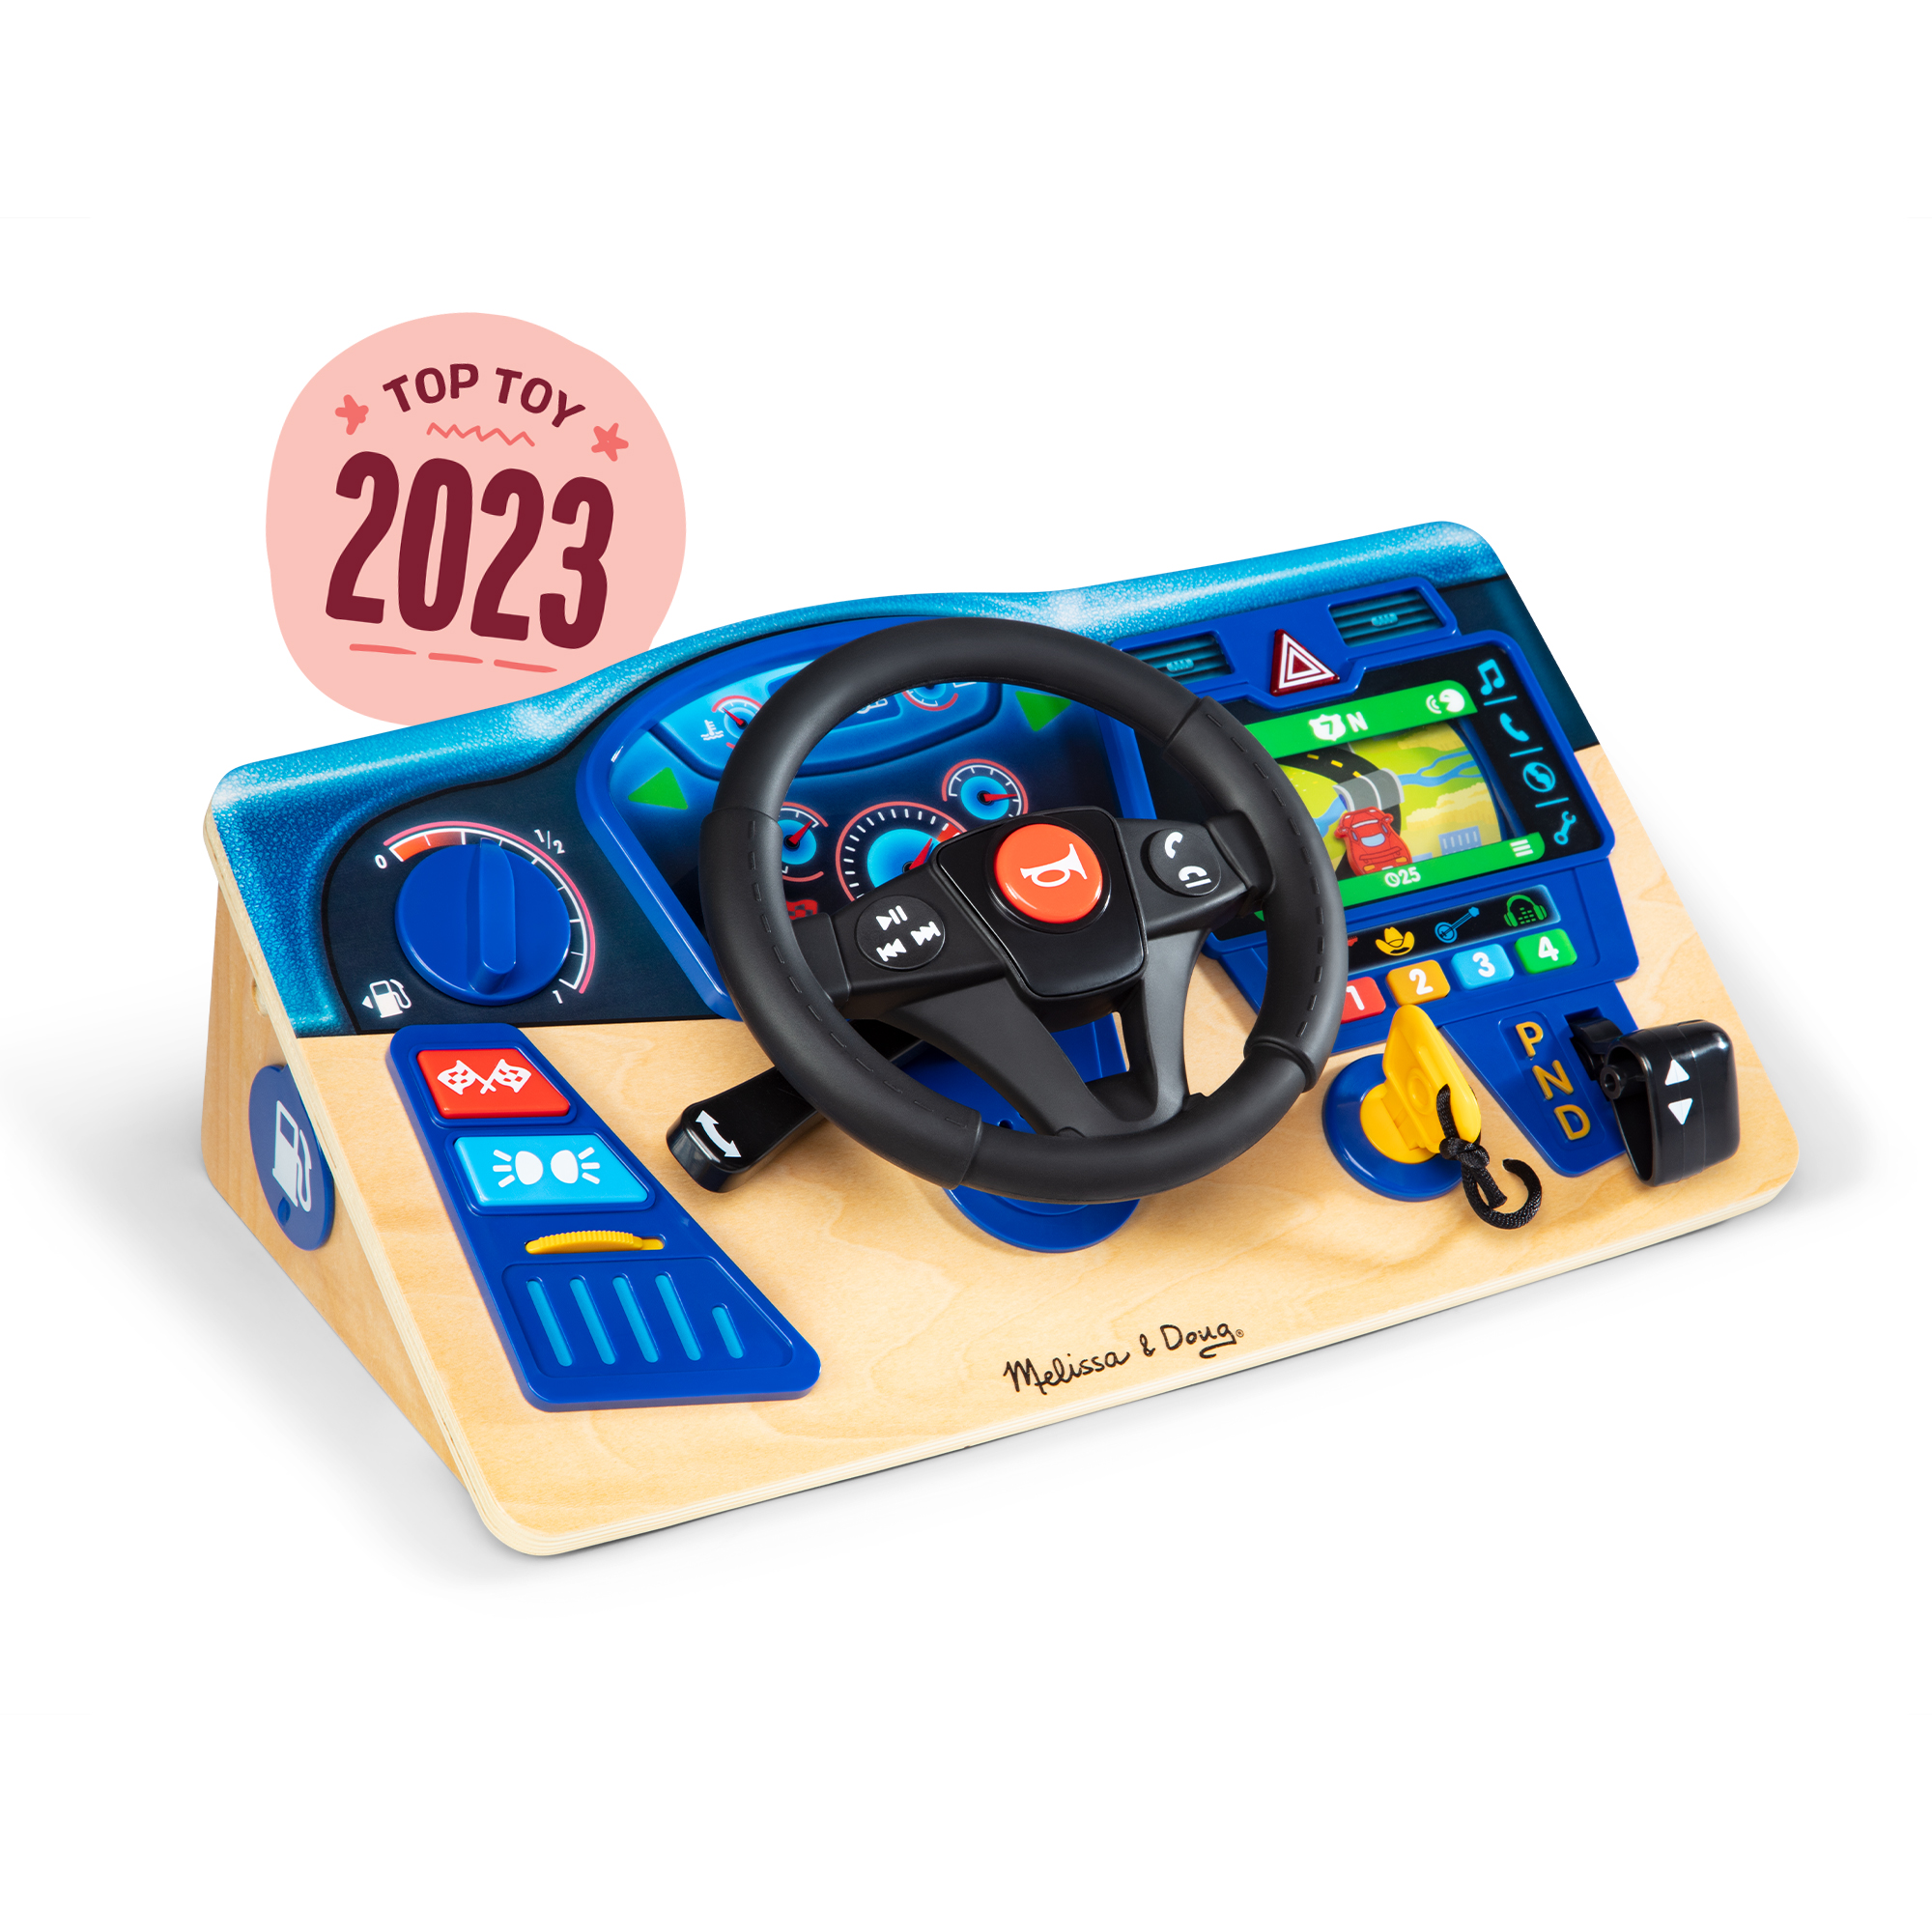 Vroom & Zoom Interactive Dashboard - PLAYNOW! Toys and Games